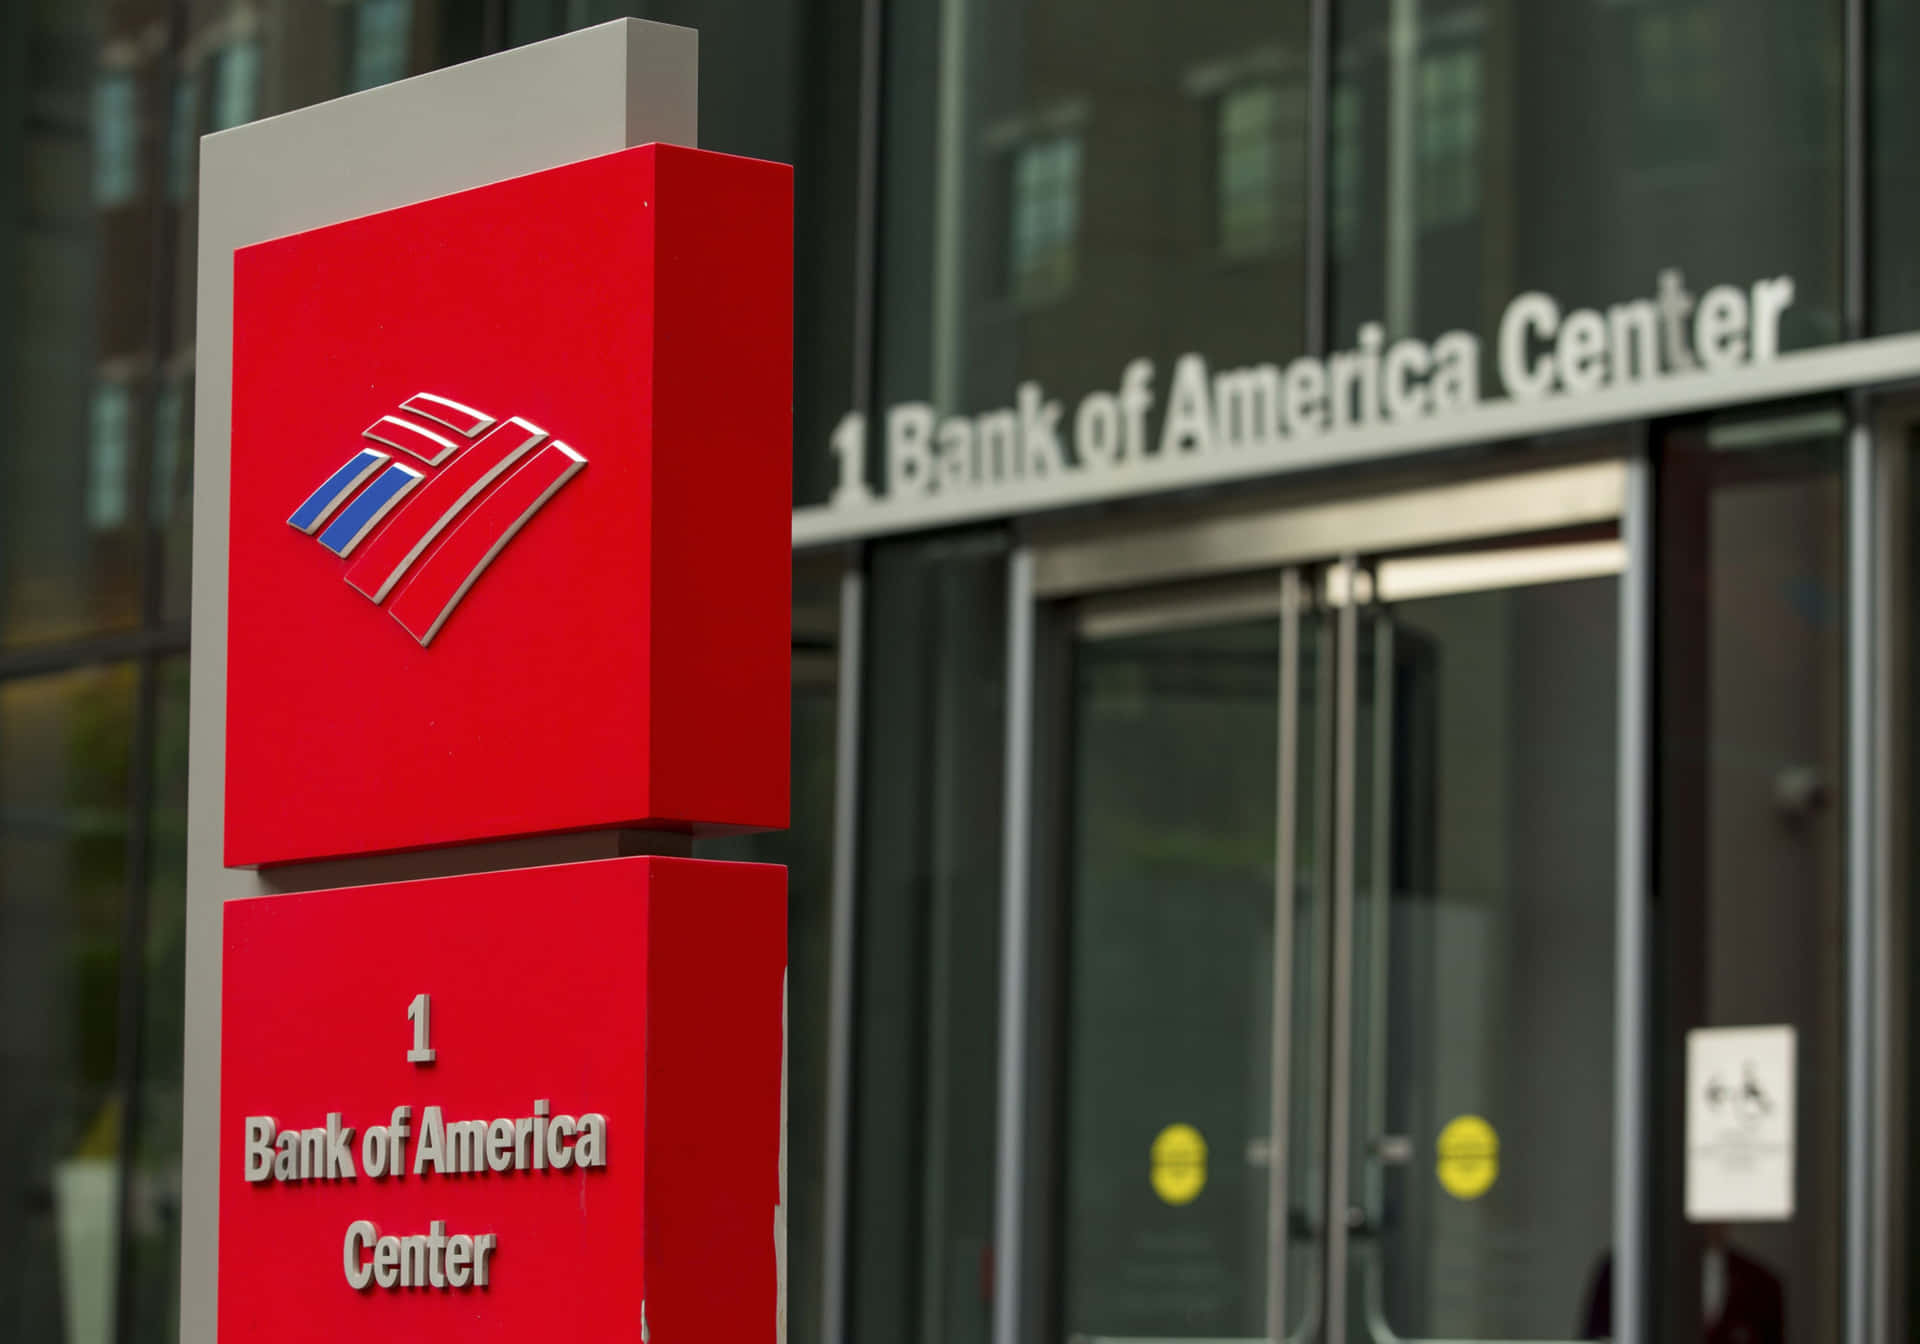 Banking with Bank of America - Innovation for Your Financial Needs